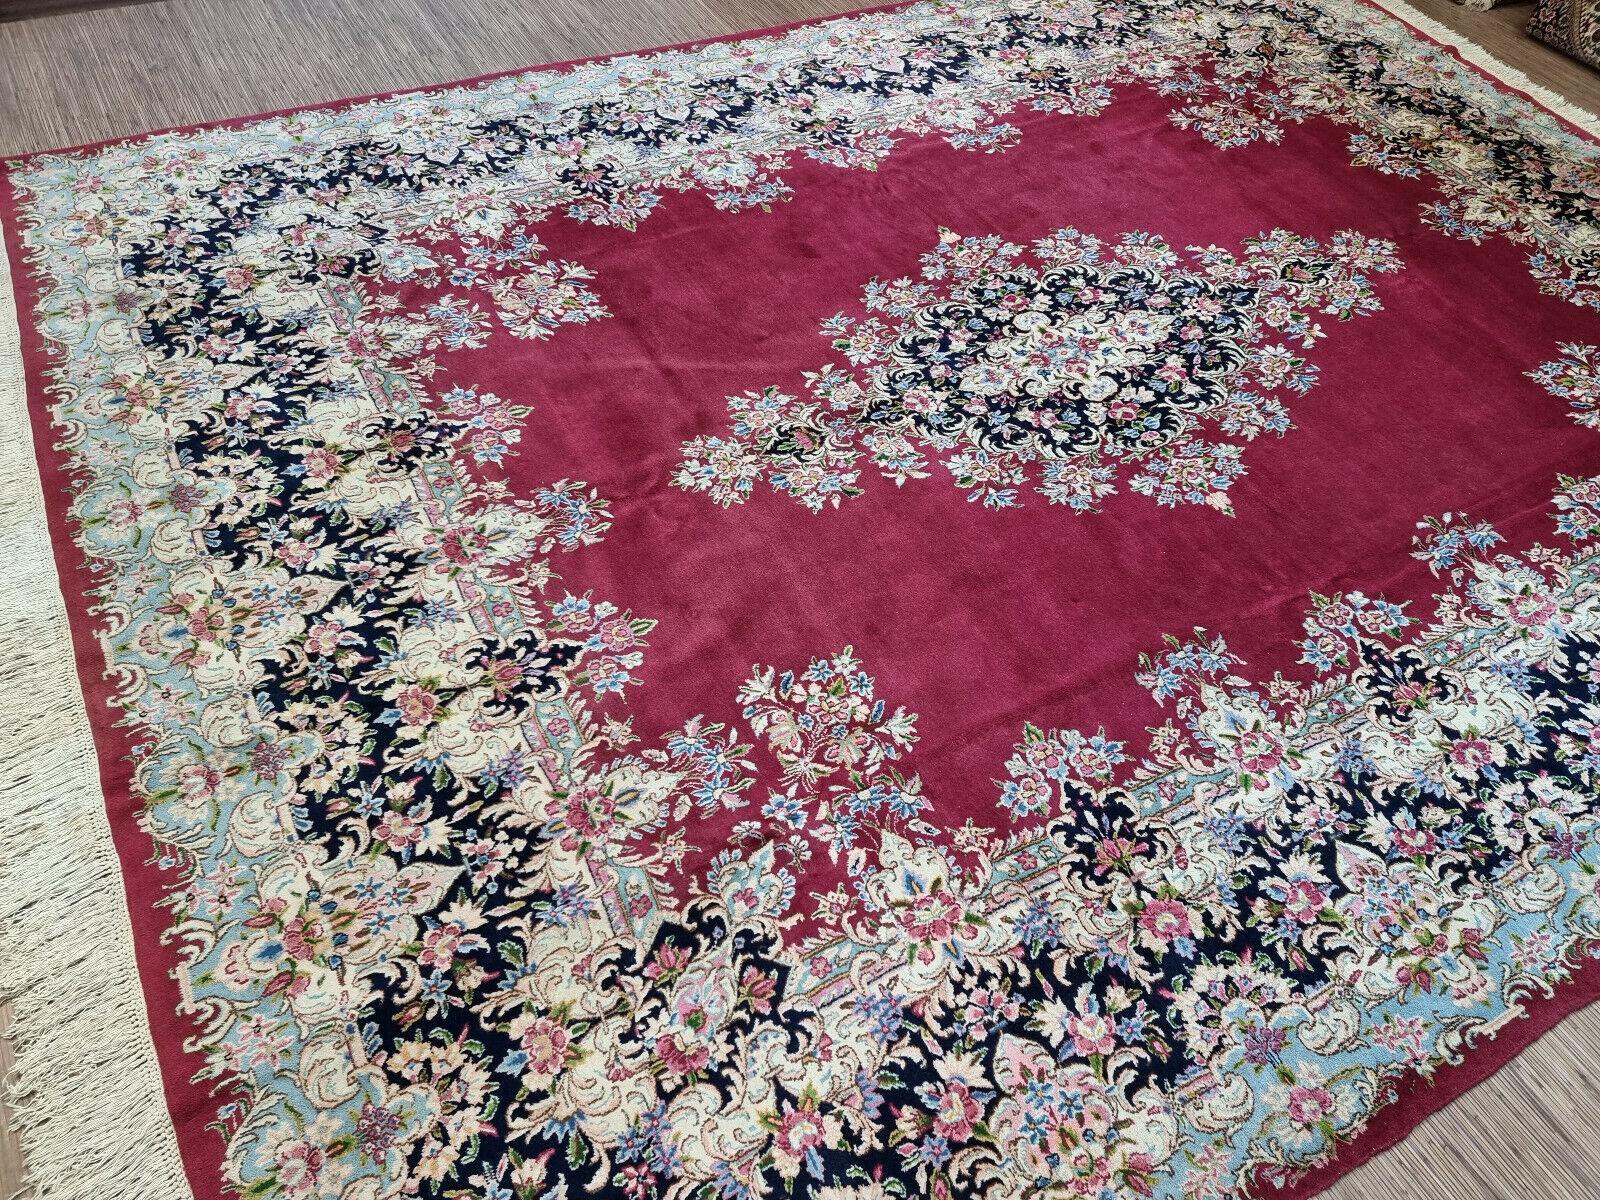 Handmade Vintage Persian Style Kerman Rug 10.1' x 13.1', 1970s - 1D73 In Good Condition For Sale In Bordeaux, FR